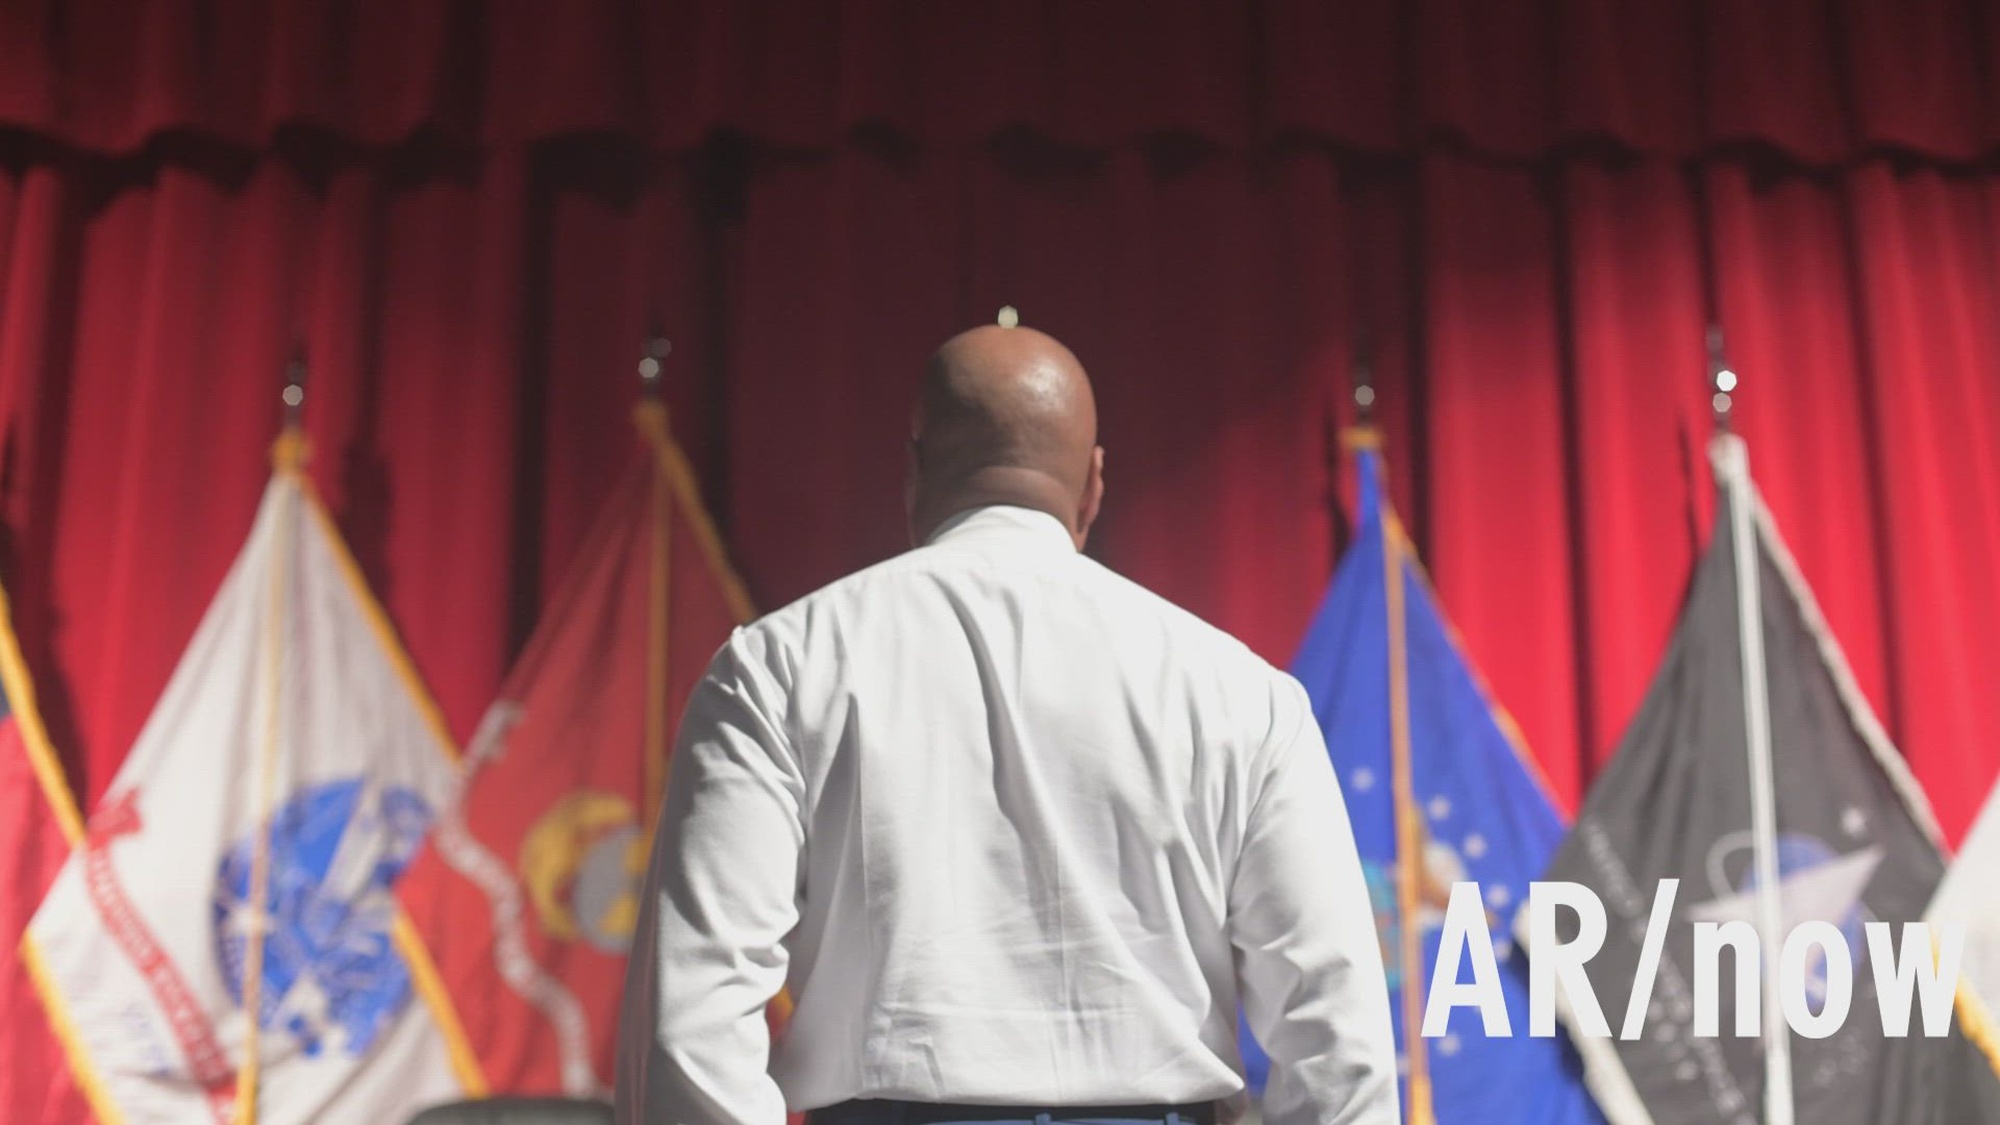 In this episode, the U.S. Army Reserve Command Honor Guard supports a local event in honor of Black History Month.